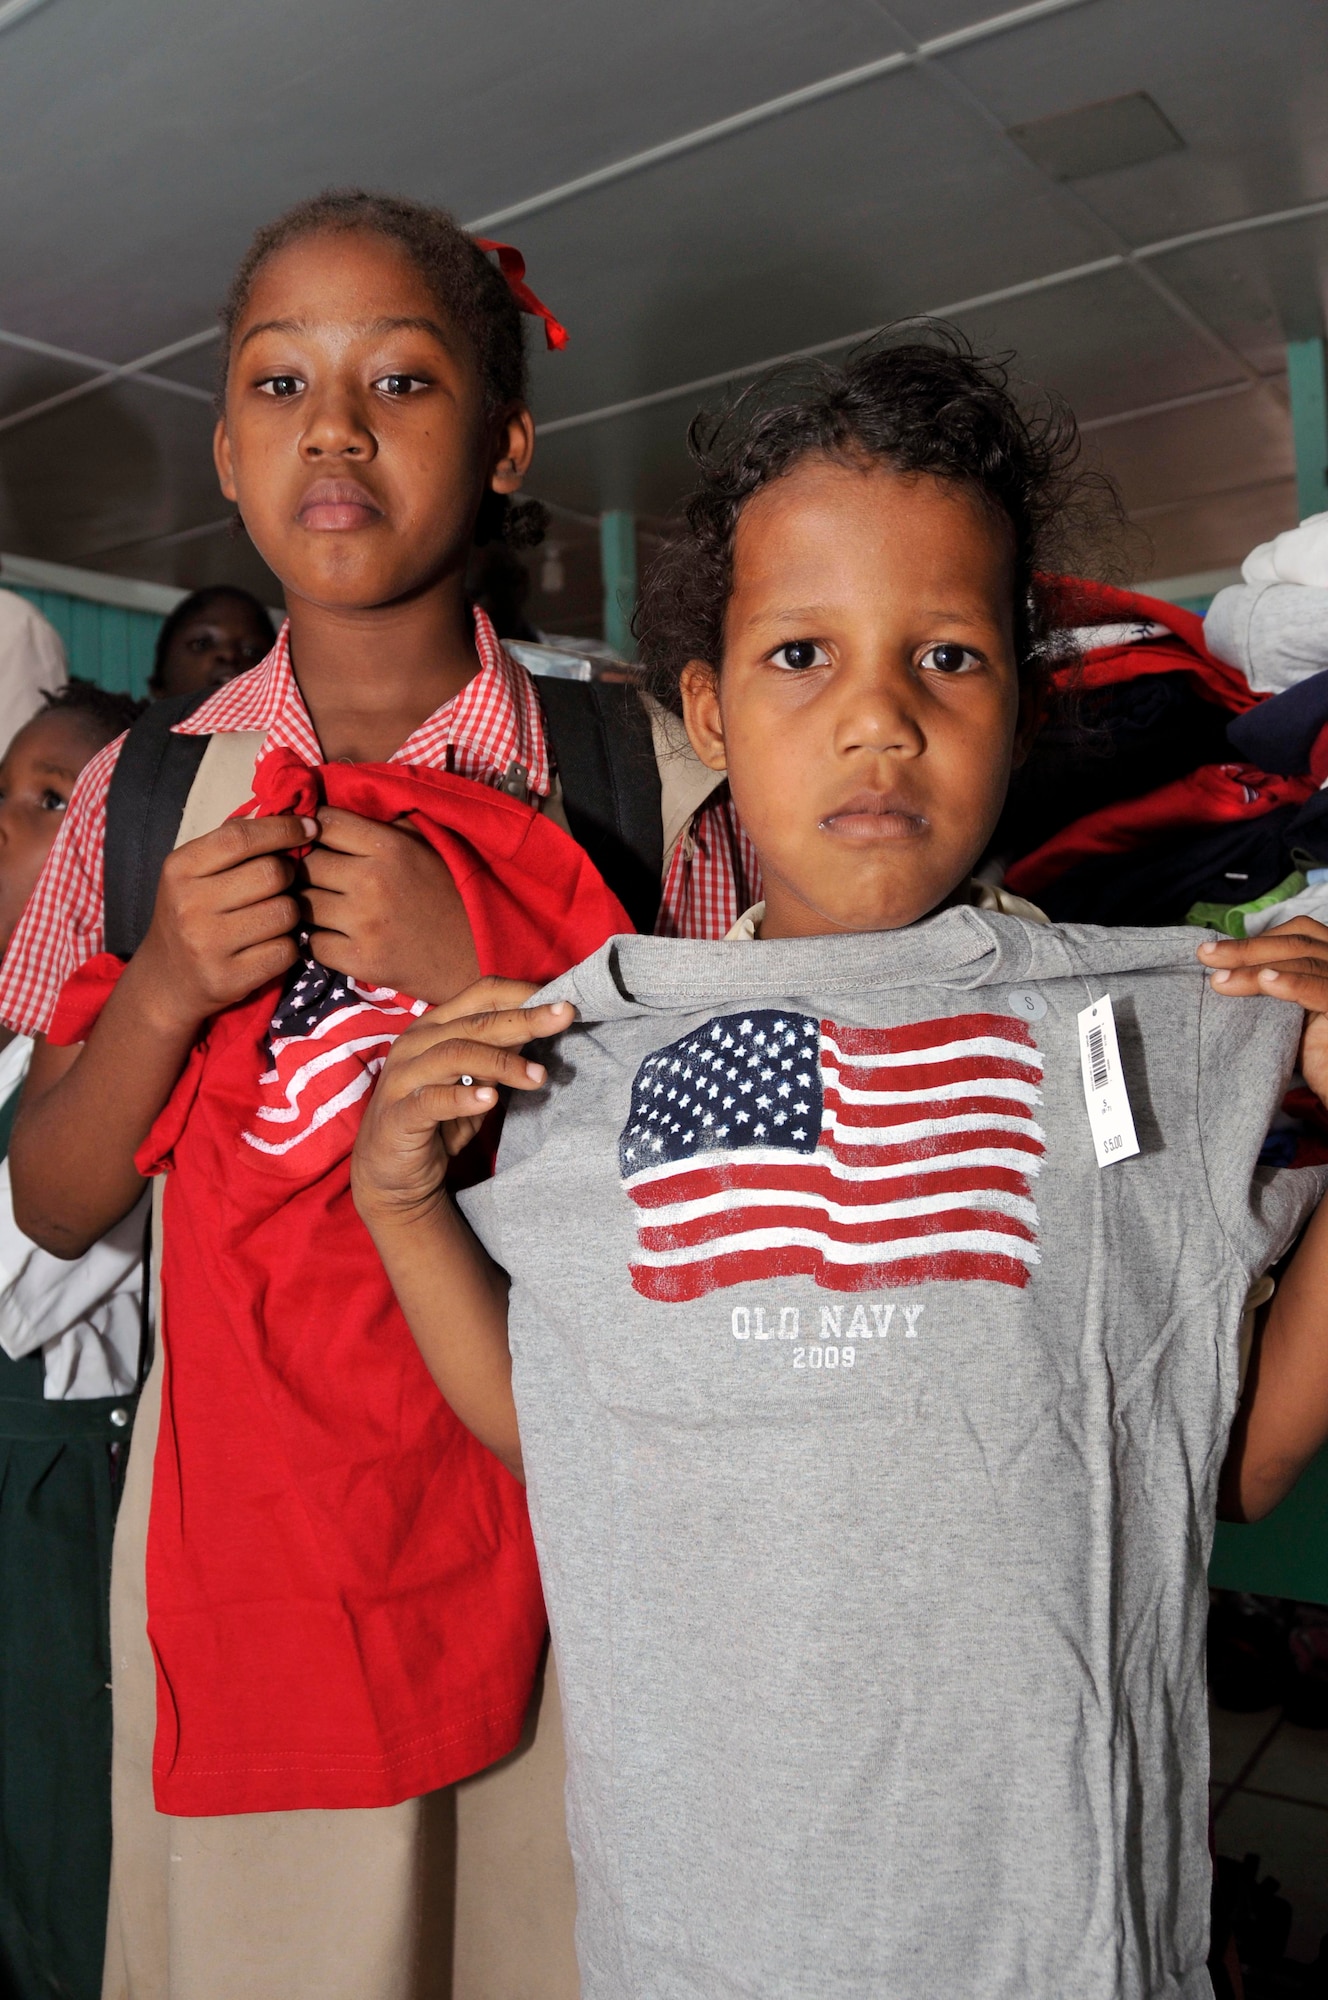 Guyanese girls from Joshua's Place Orphanage show off their new T-shirts Sept. 9, 2009. in Georgetown, Guyana. Soldiers from the Georgia Army National Guard brought 32 duffel bags of toys and clothes and over $3,800 in donated items to the orphanage. (U.S. Air Force photo by Airman 1st Class Perry Aston) (Released)